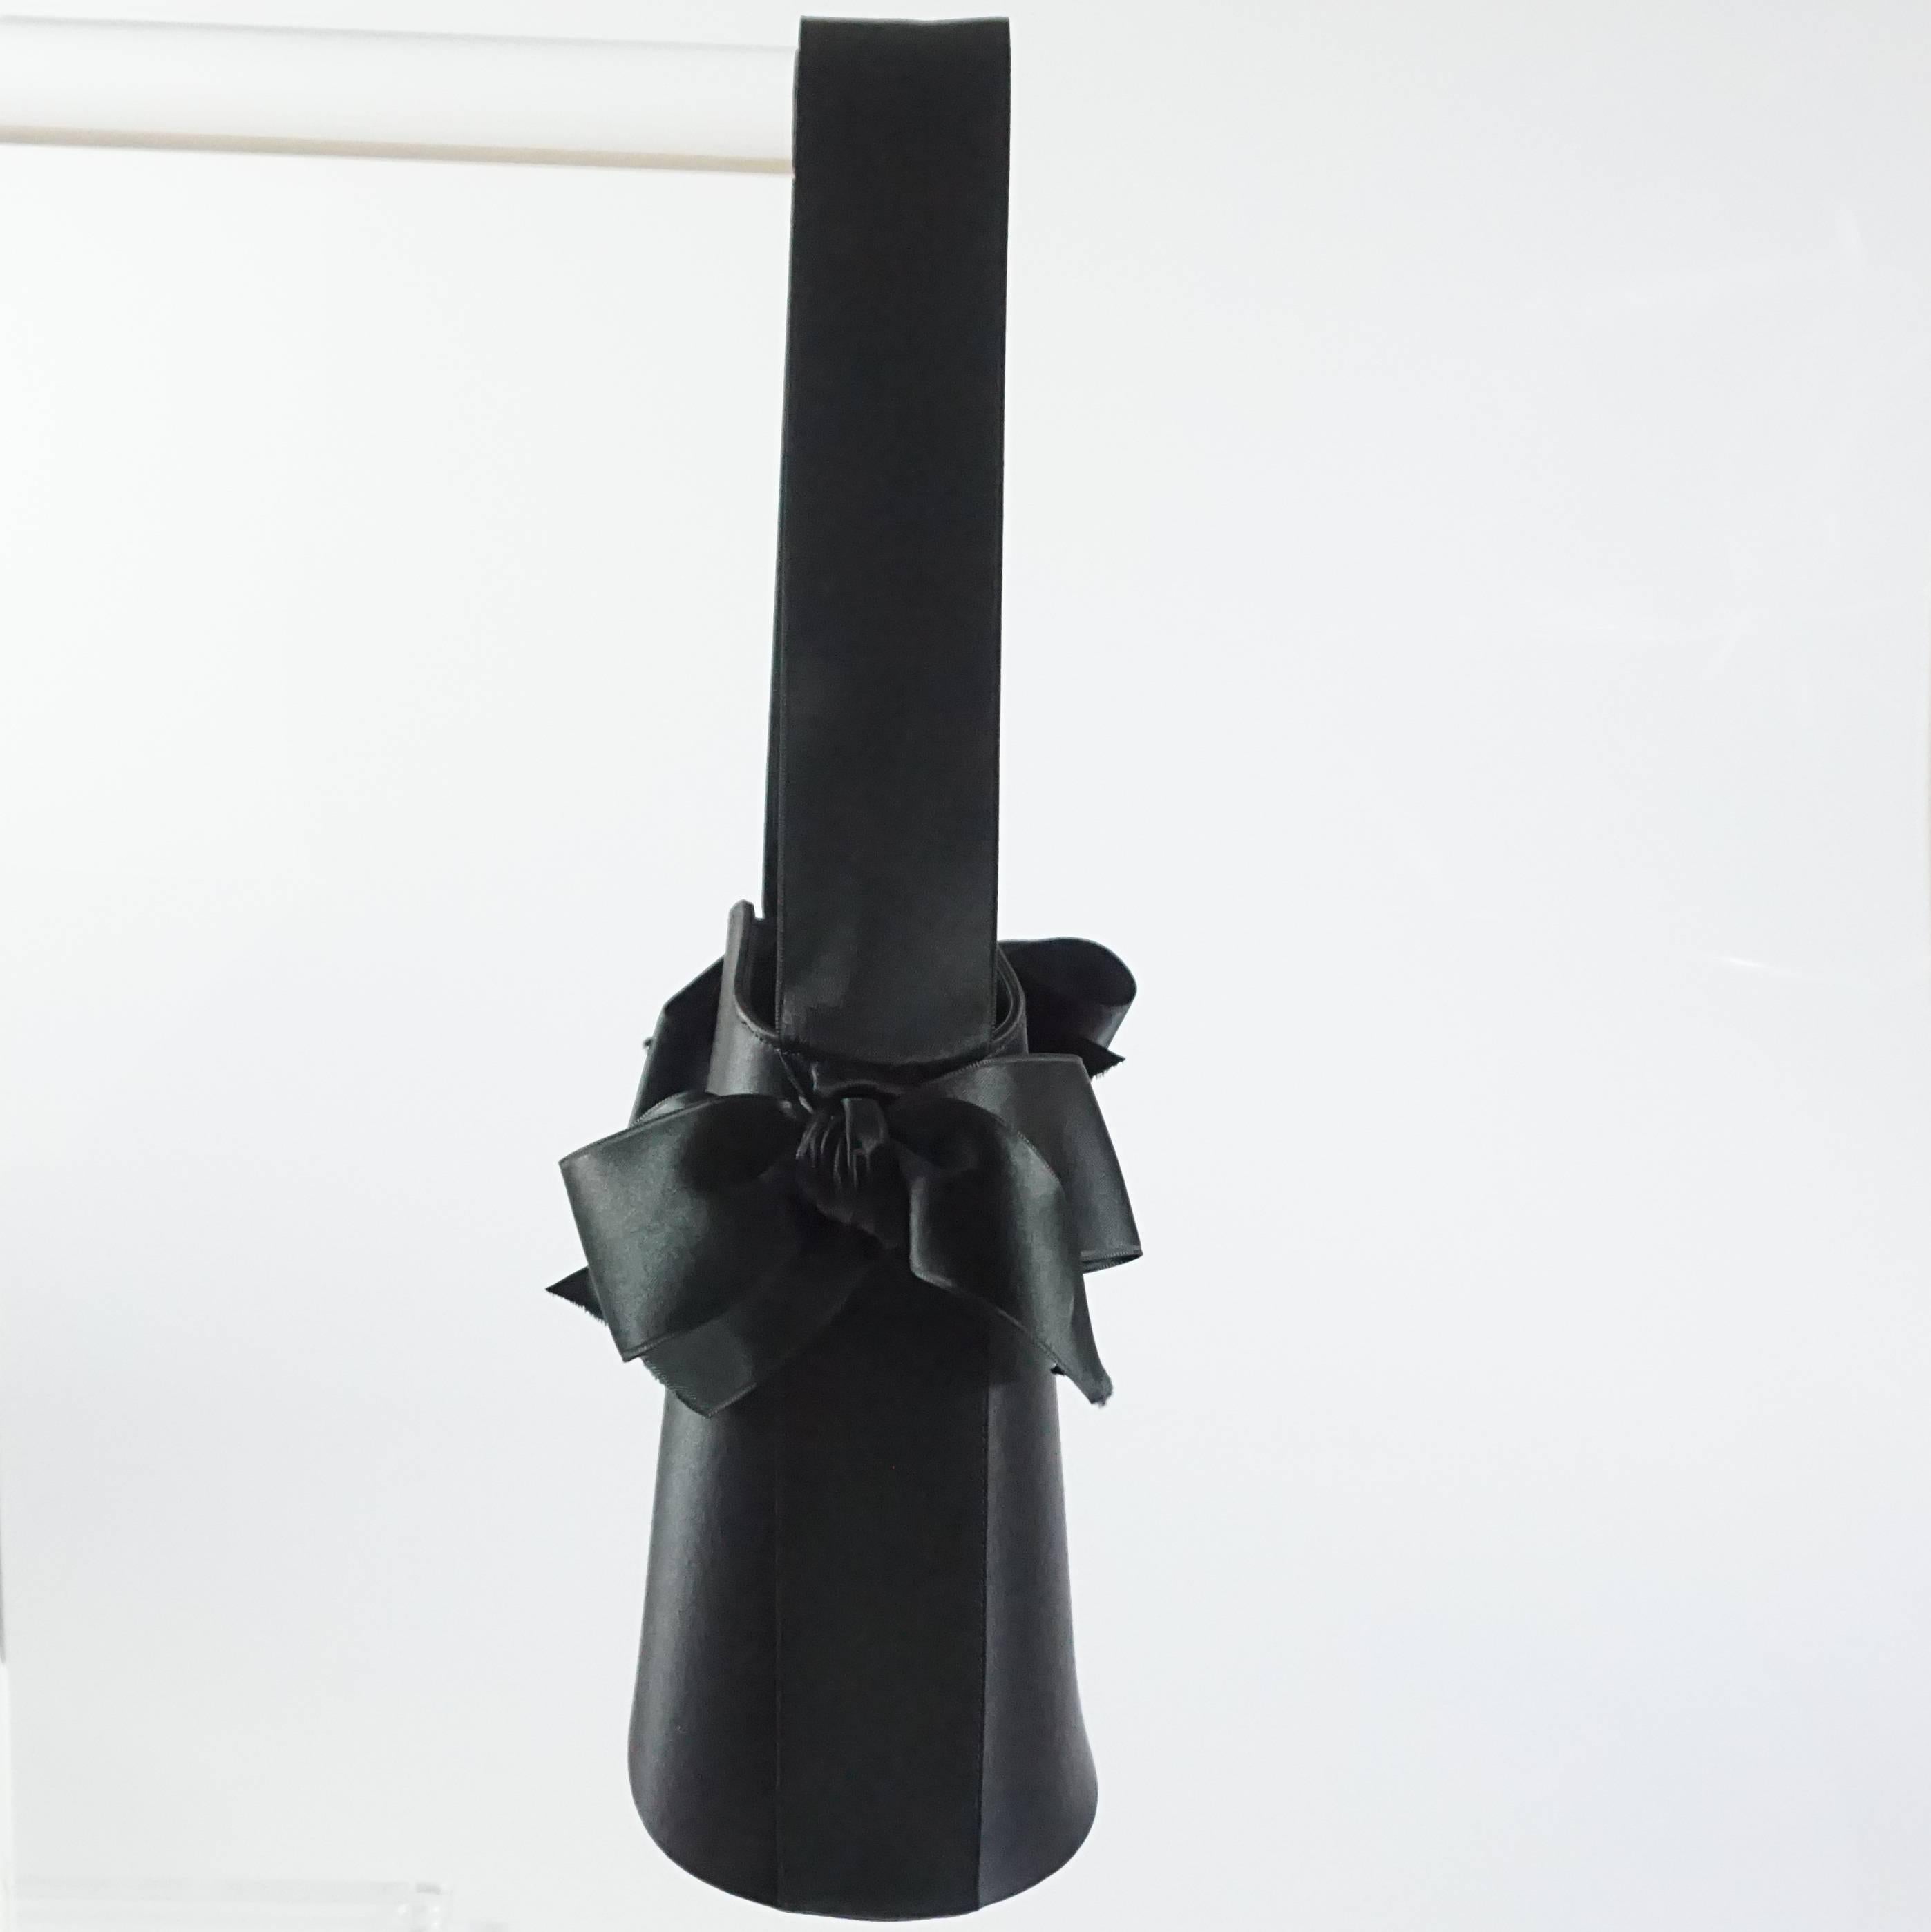 This Renaud Pellegrino top handle bag is made of beautiful black satin. It features a ribbon handle and two ribbon bows. Inside there is a pocket. This bag is in excellent condition.

Measurements
Height: 7” – 7 5/8” 
Width: 5 7/8”
Depth: 4”
Handle